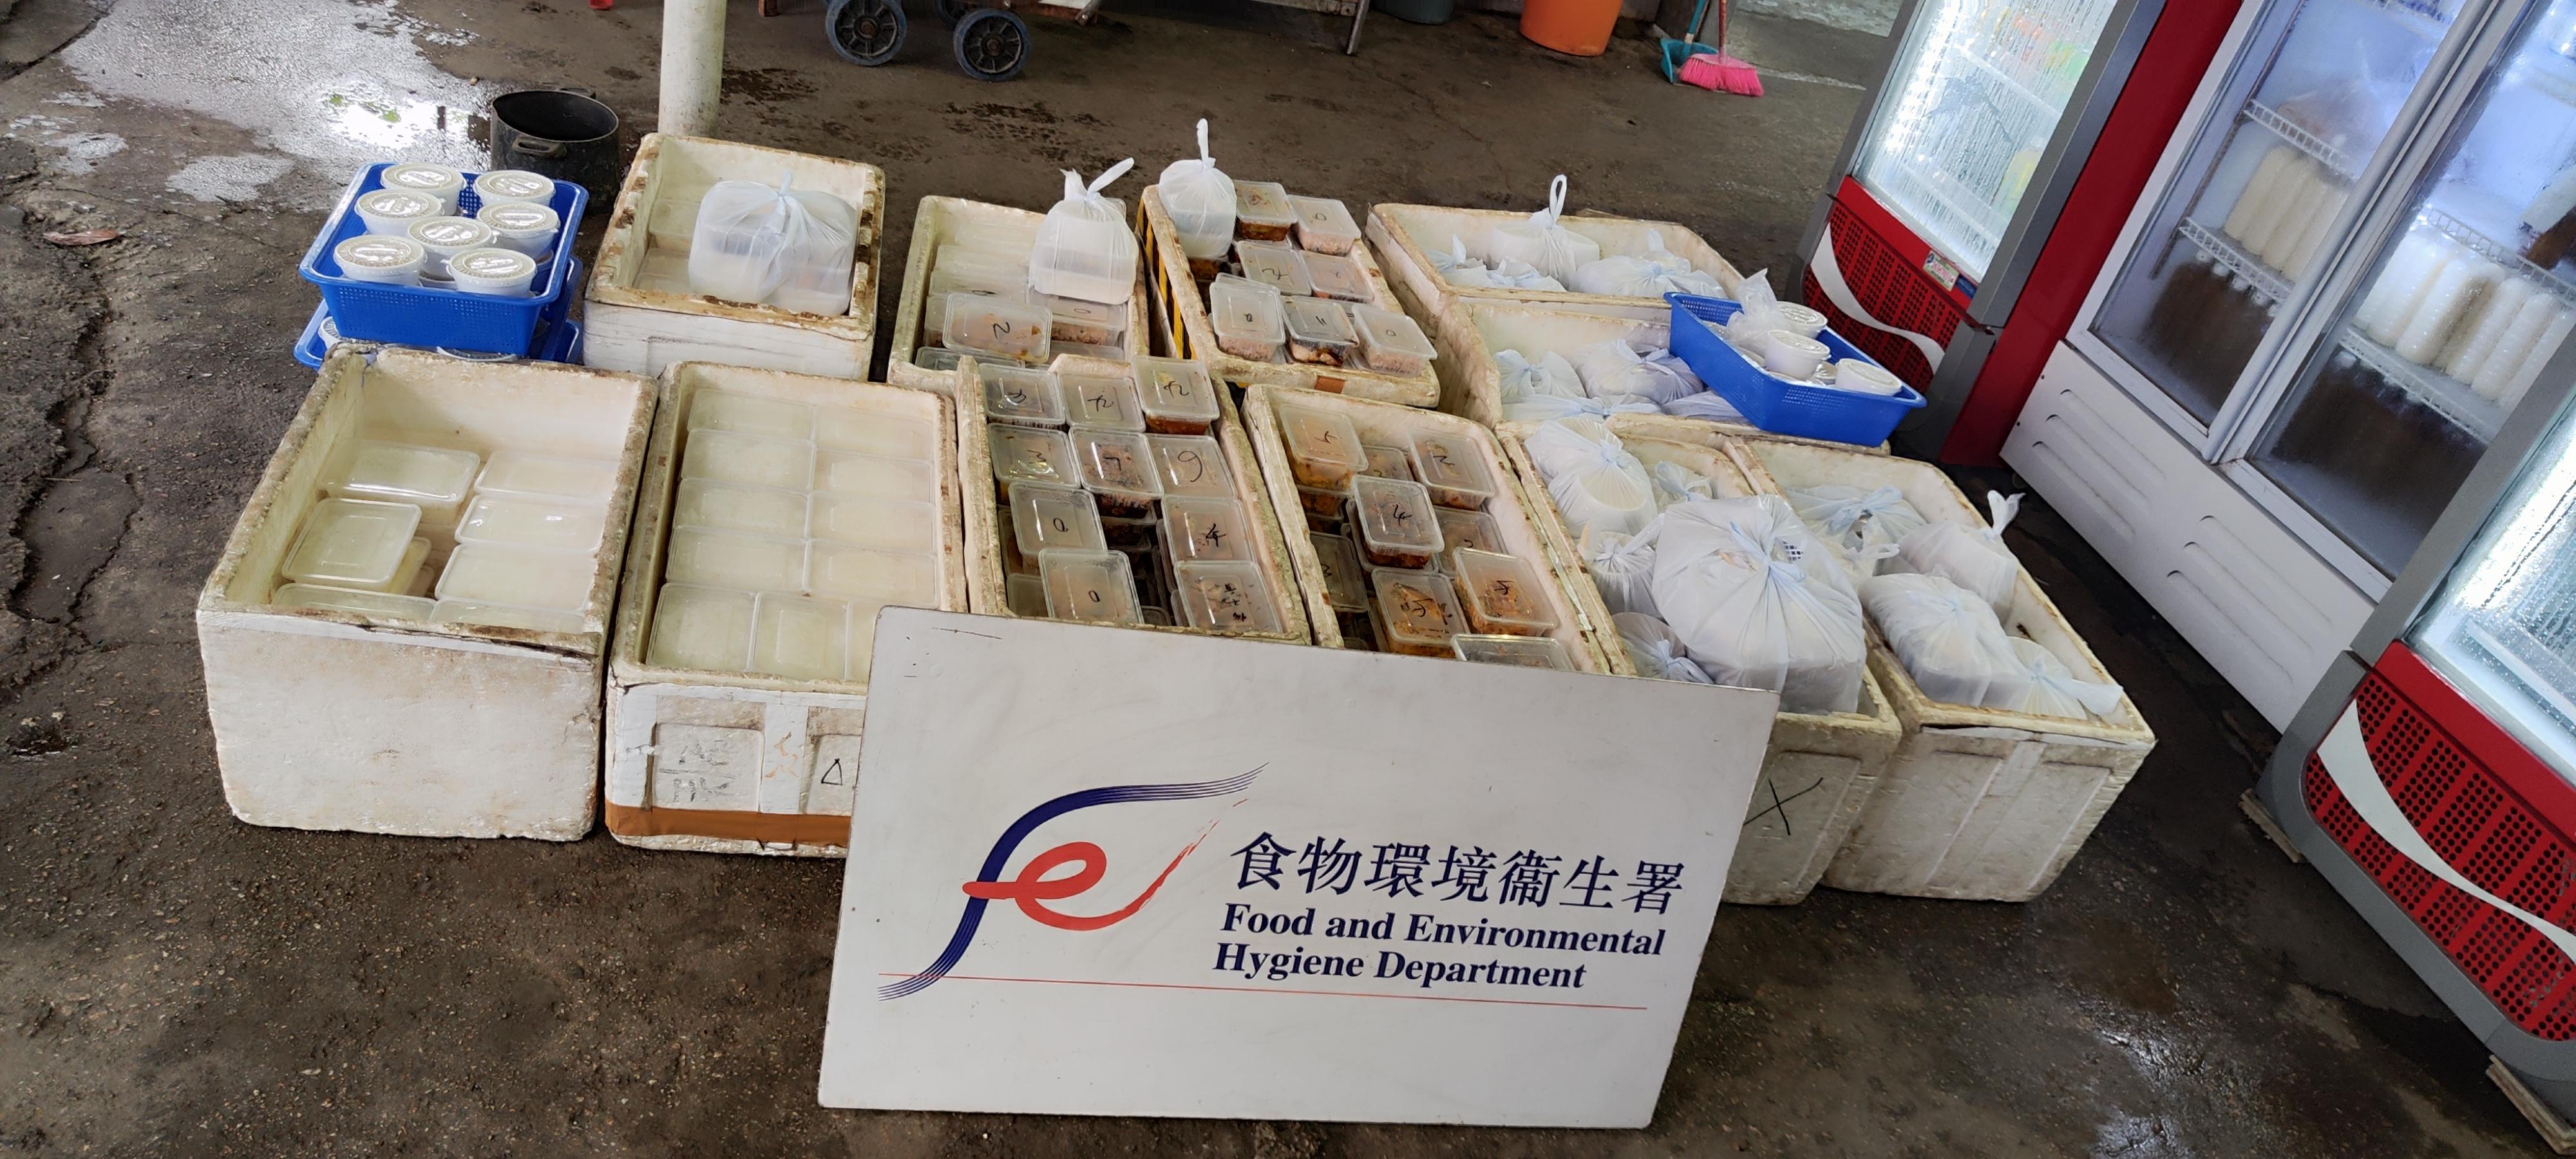 The Food and Environmental Hygiene Department and the Hong Kong Police Force raided an unlicensed food factory in Sai Kung District during a joint operation this morning (April 21). Photo shows the food seized in the operation.
